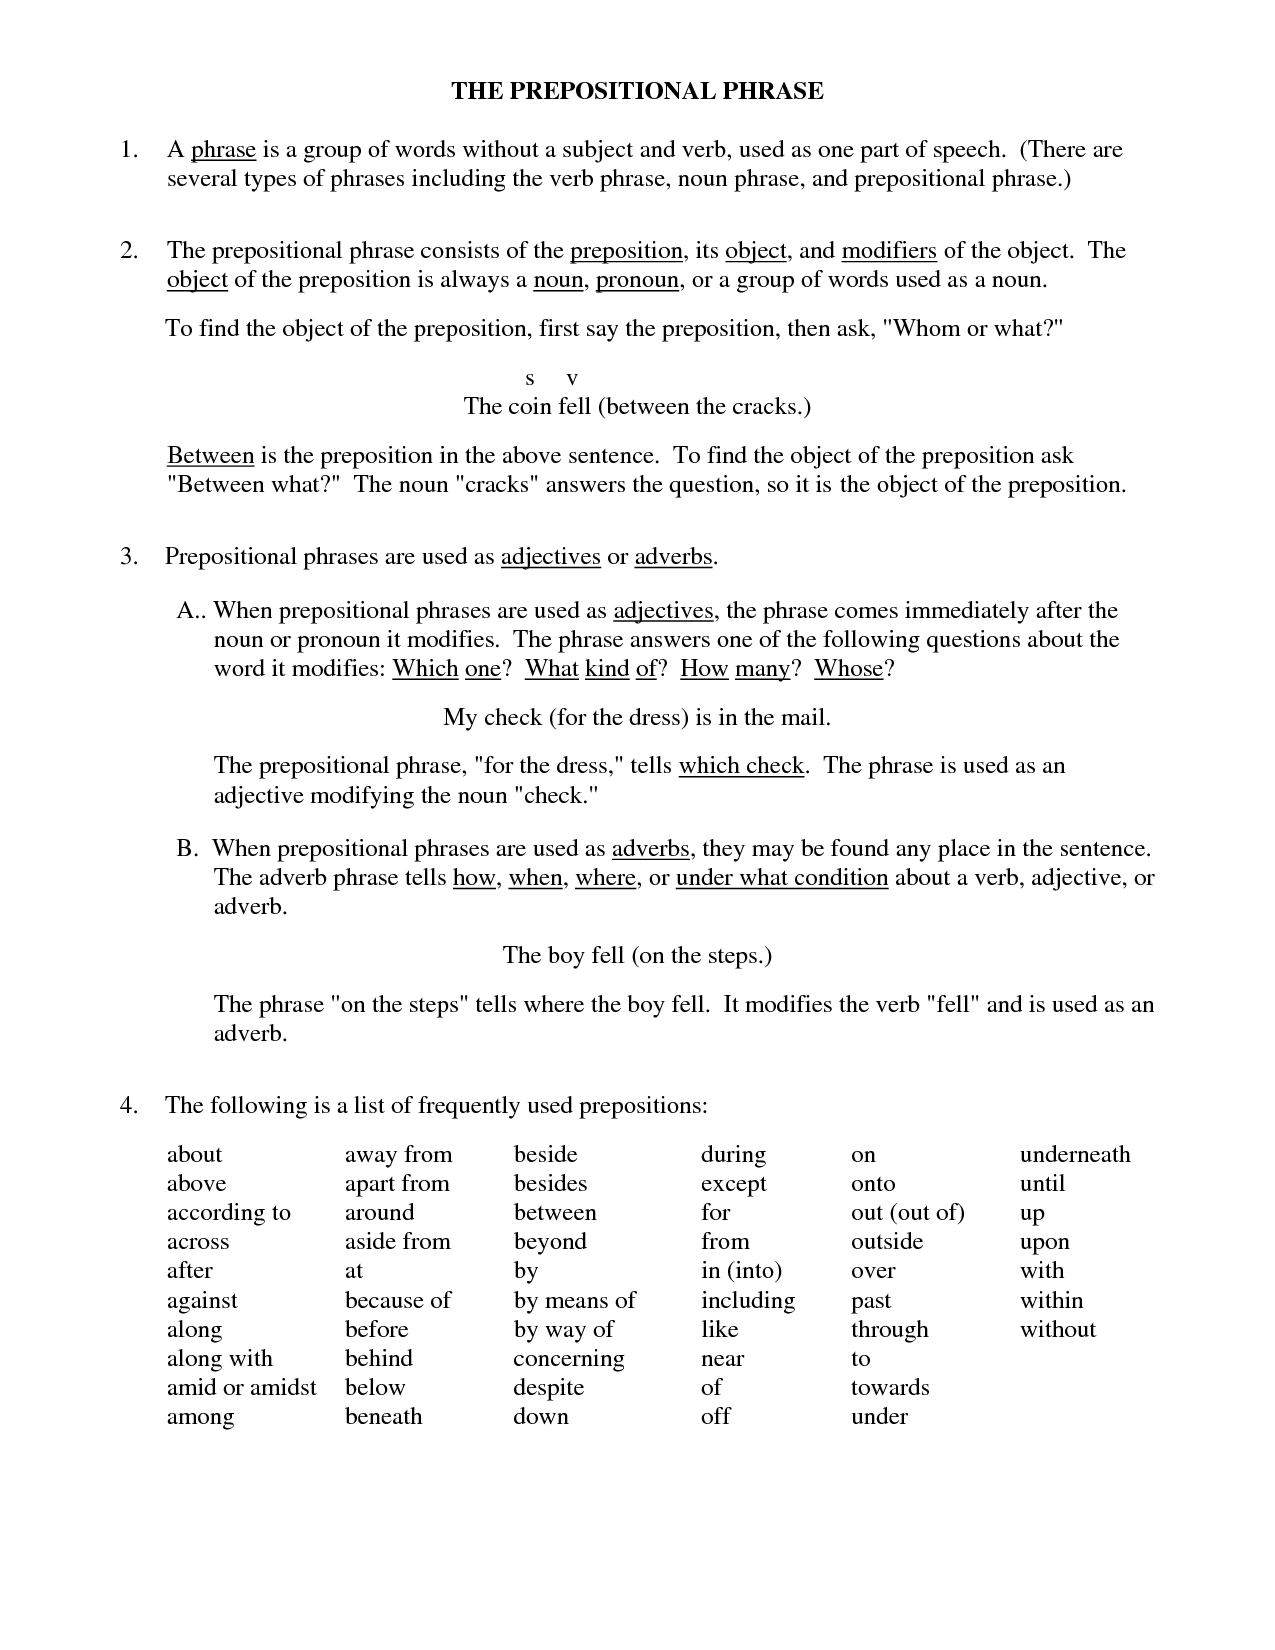 15 Best Images Of Prepositions Prepositional Phrases Worksheet Prepositions And Prepositional